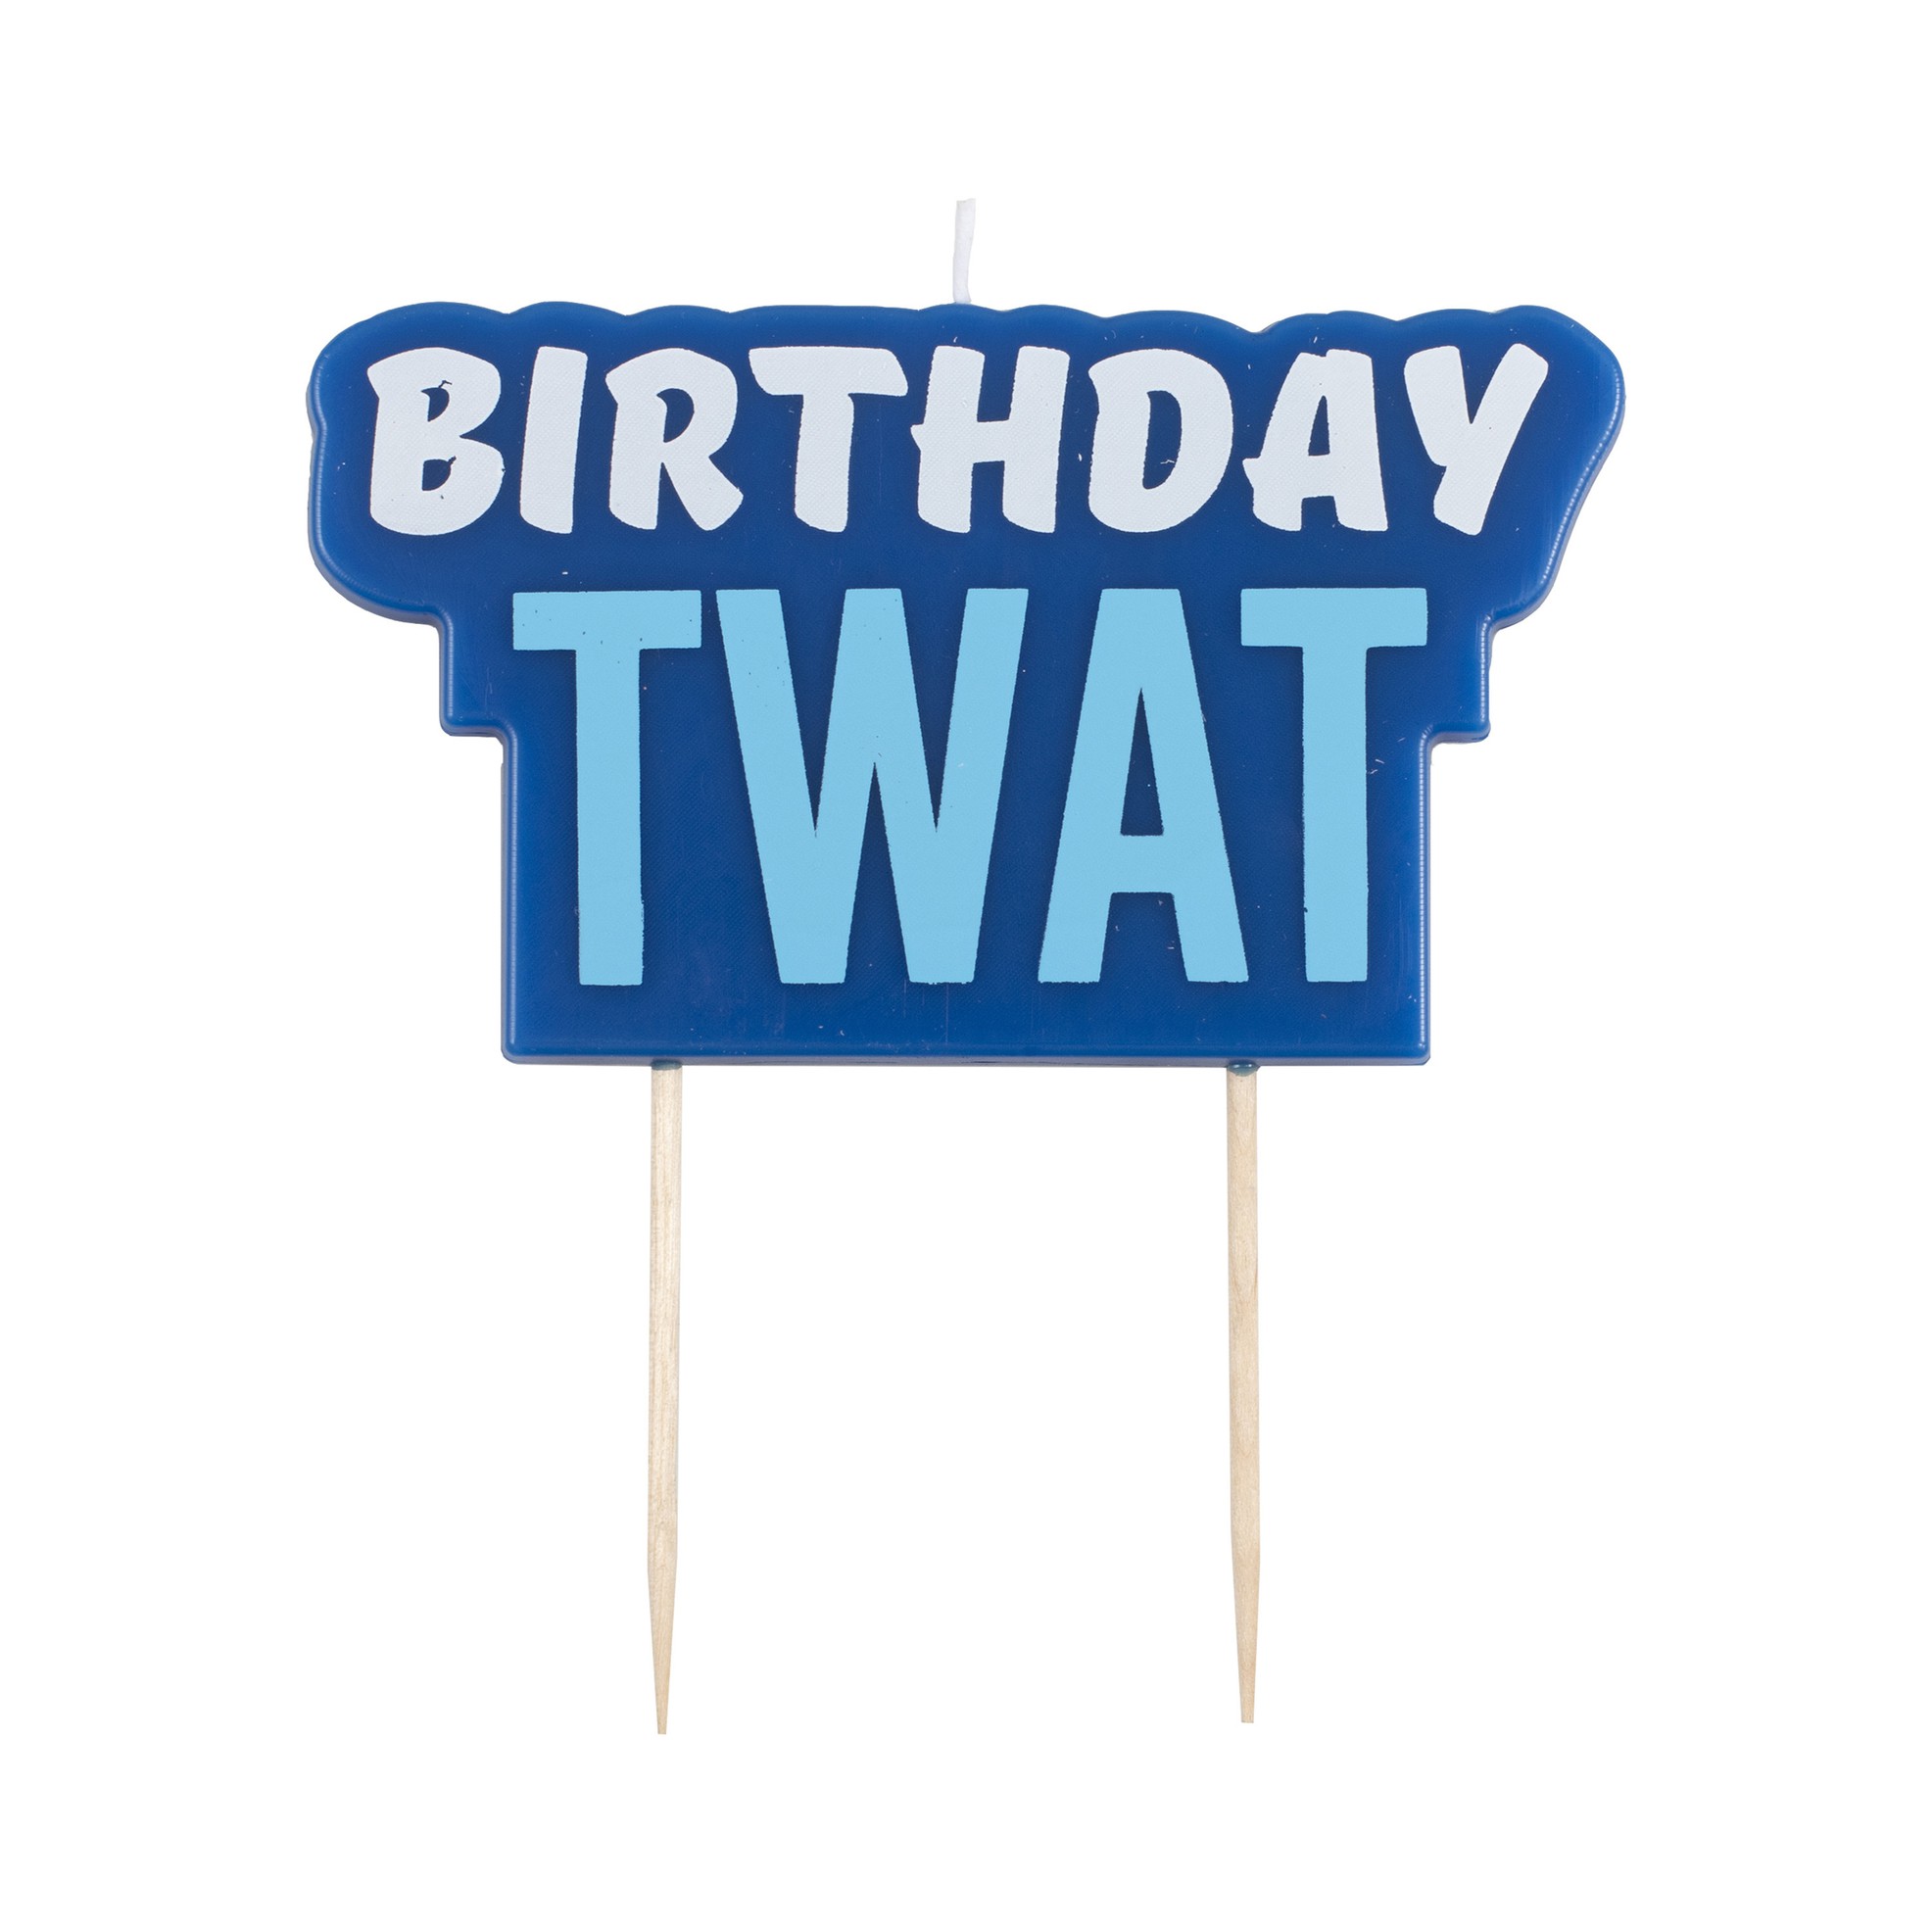 Ginger Ray Birthday Twat Cake Candle